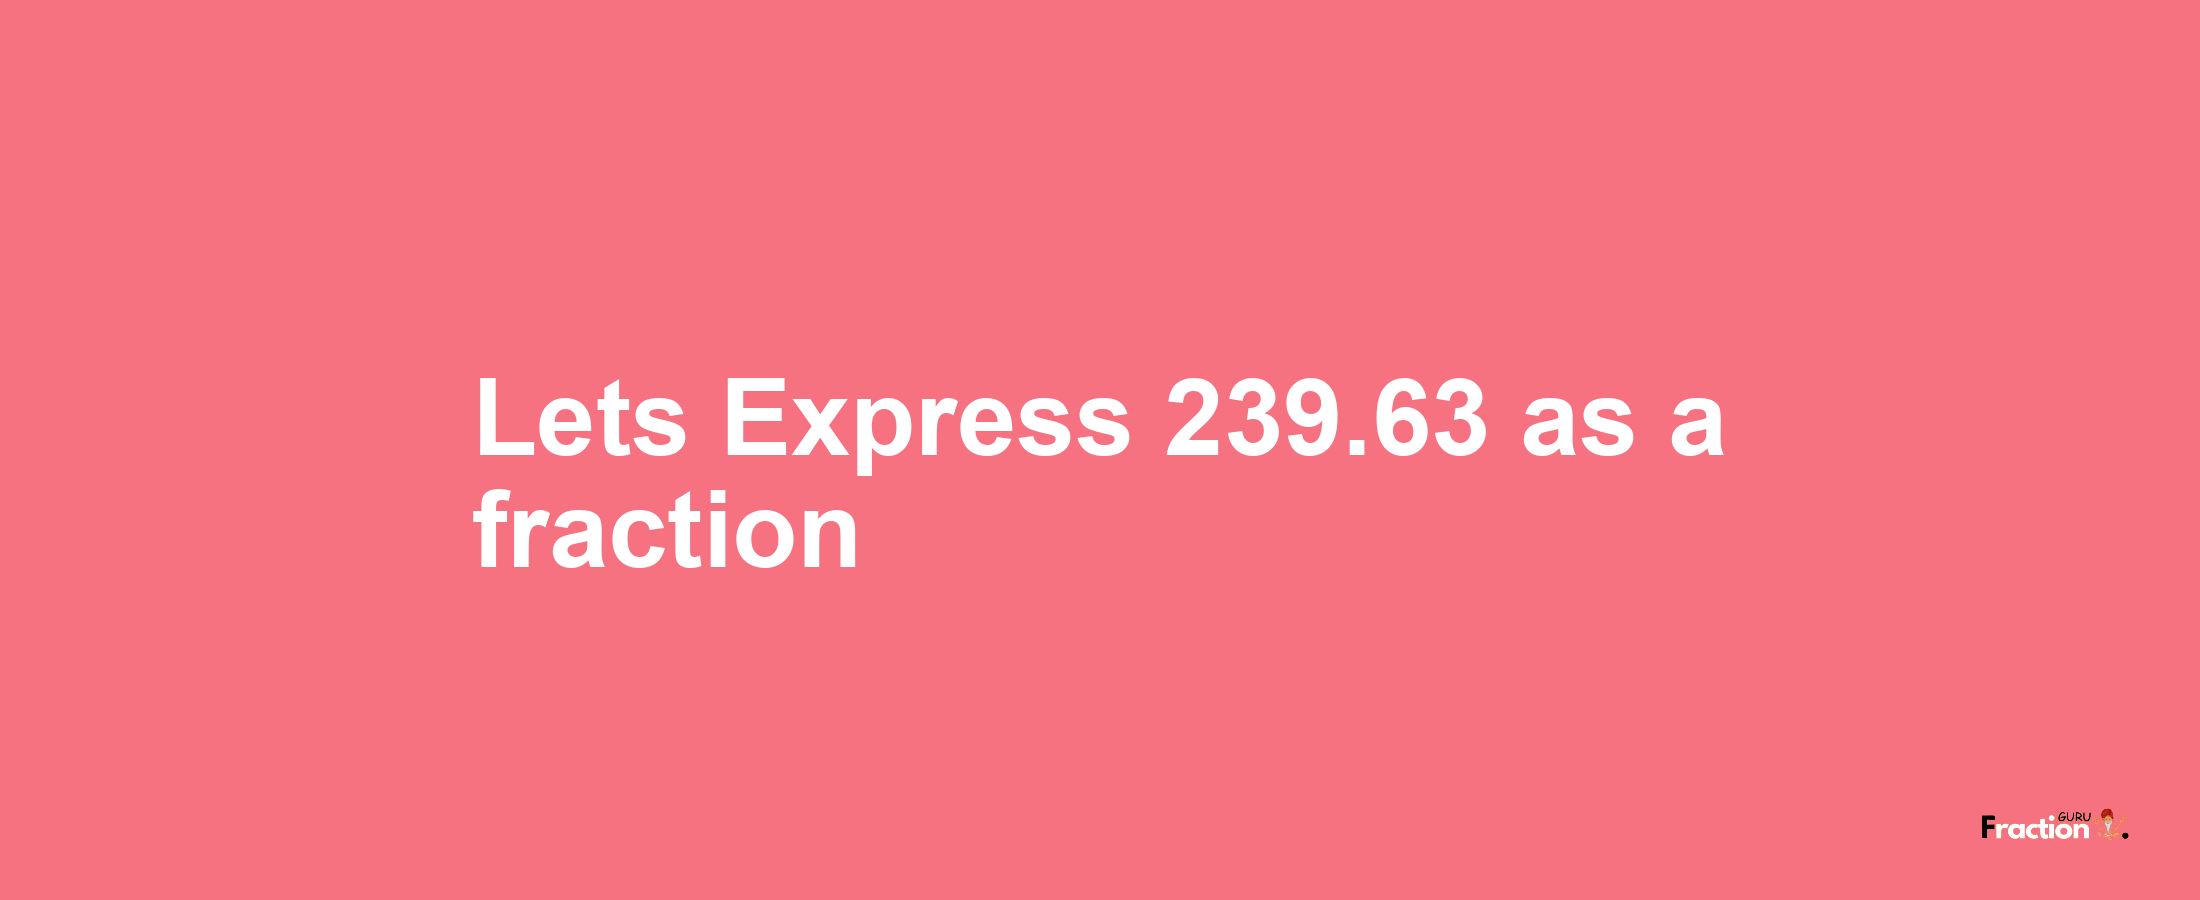 Lets Express 239.63 as afraction